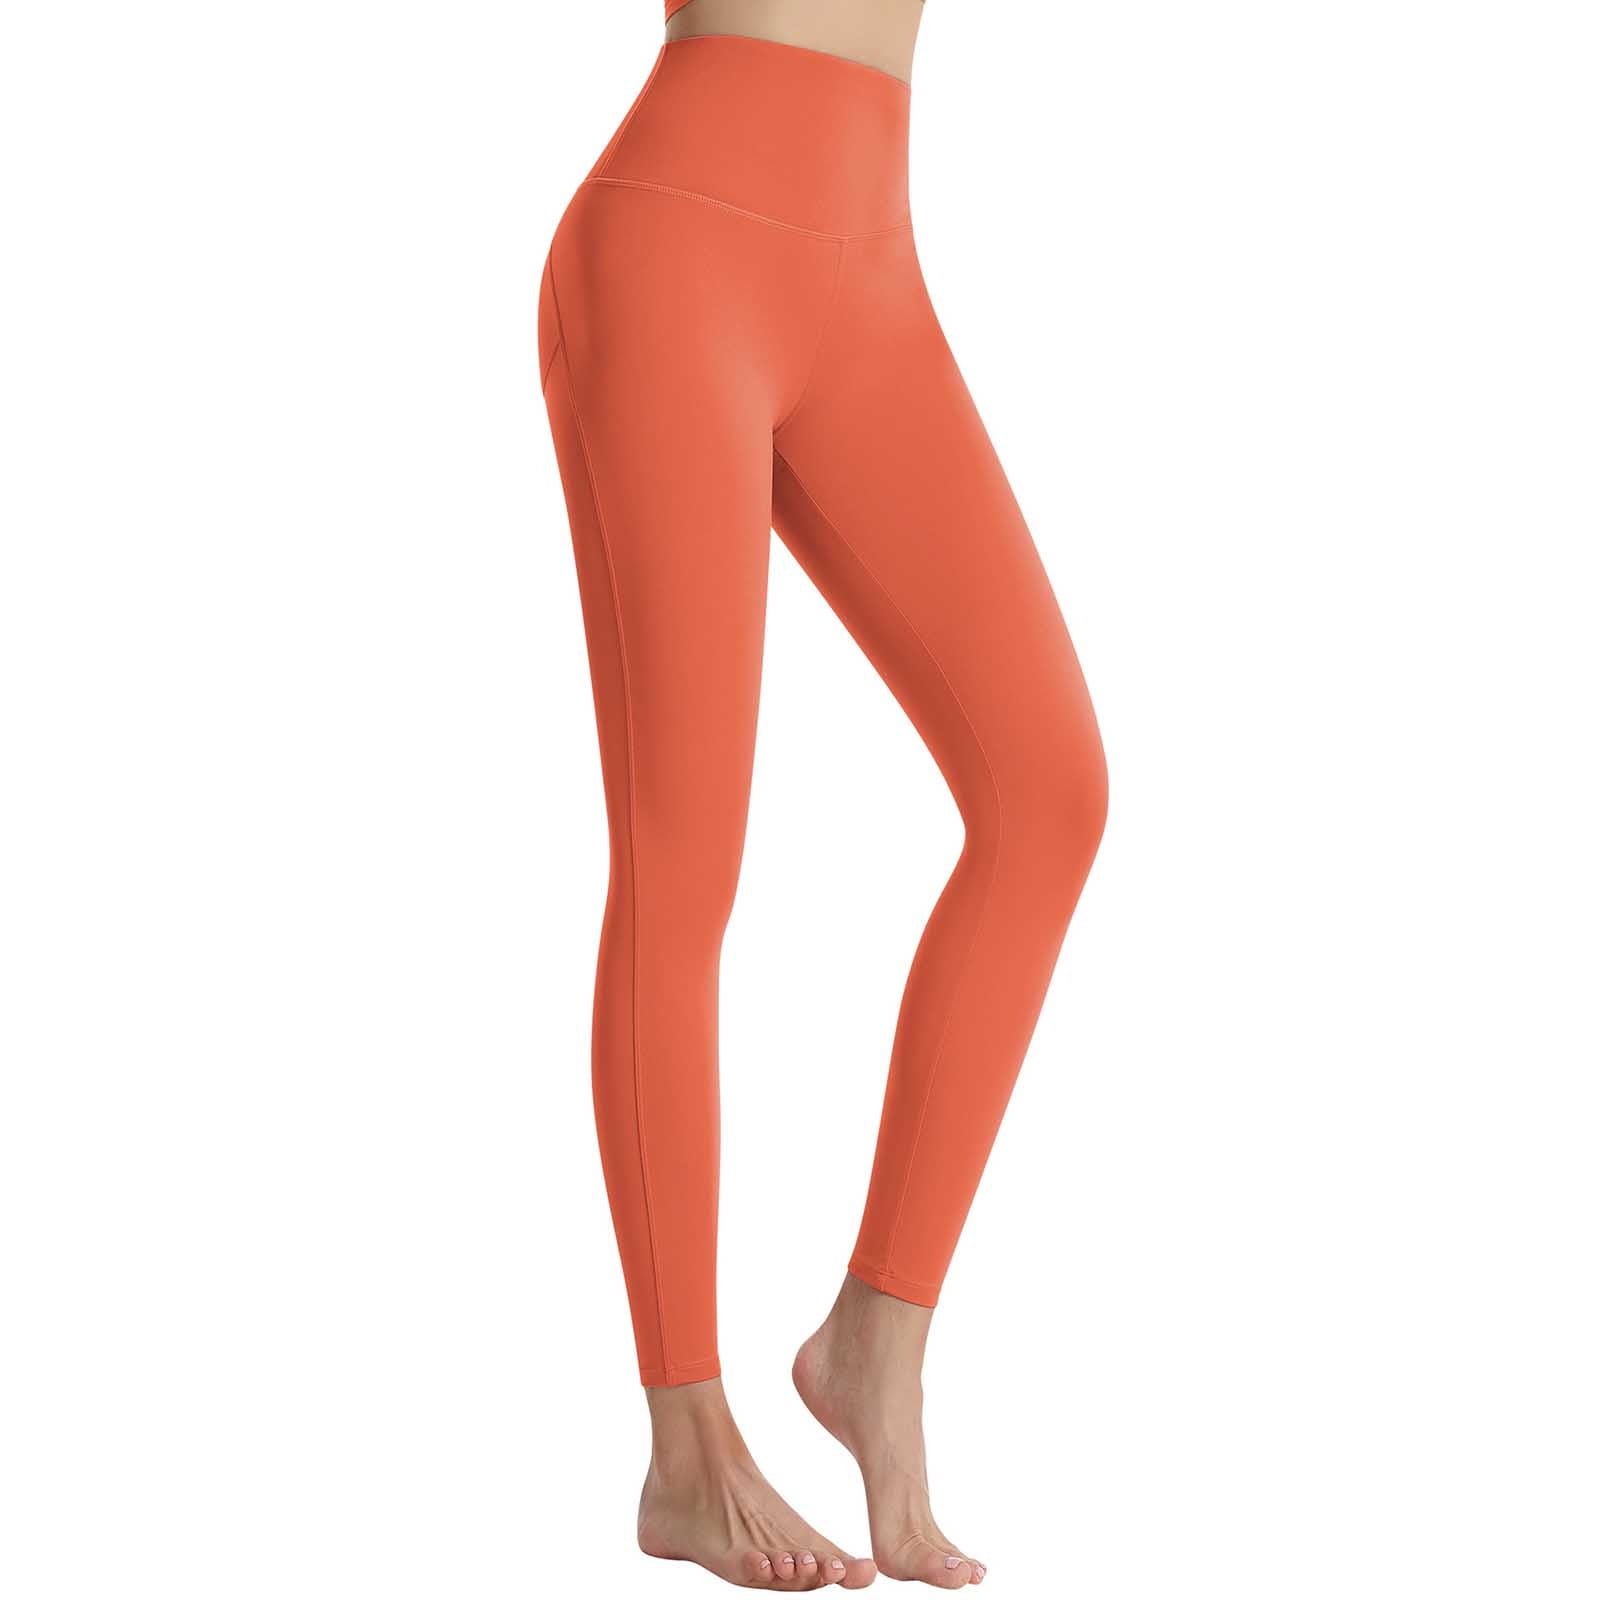 YUNAFFT Yoga Pants for Women Clearance Plus Size Women's Sport